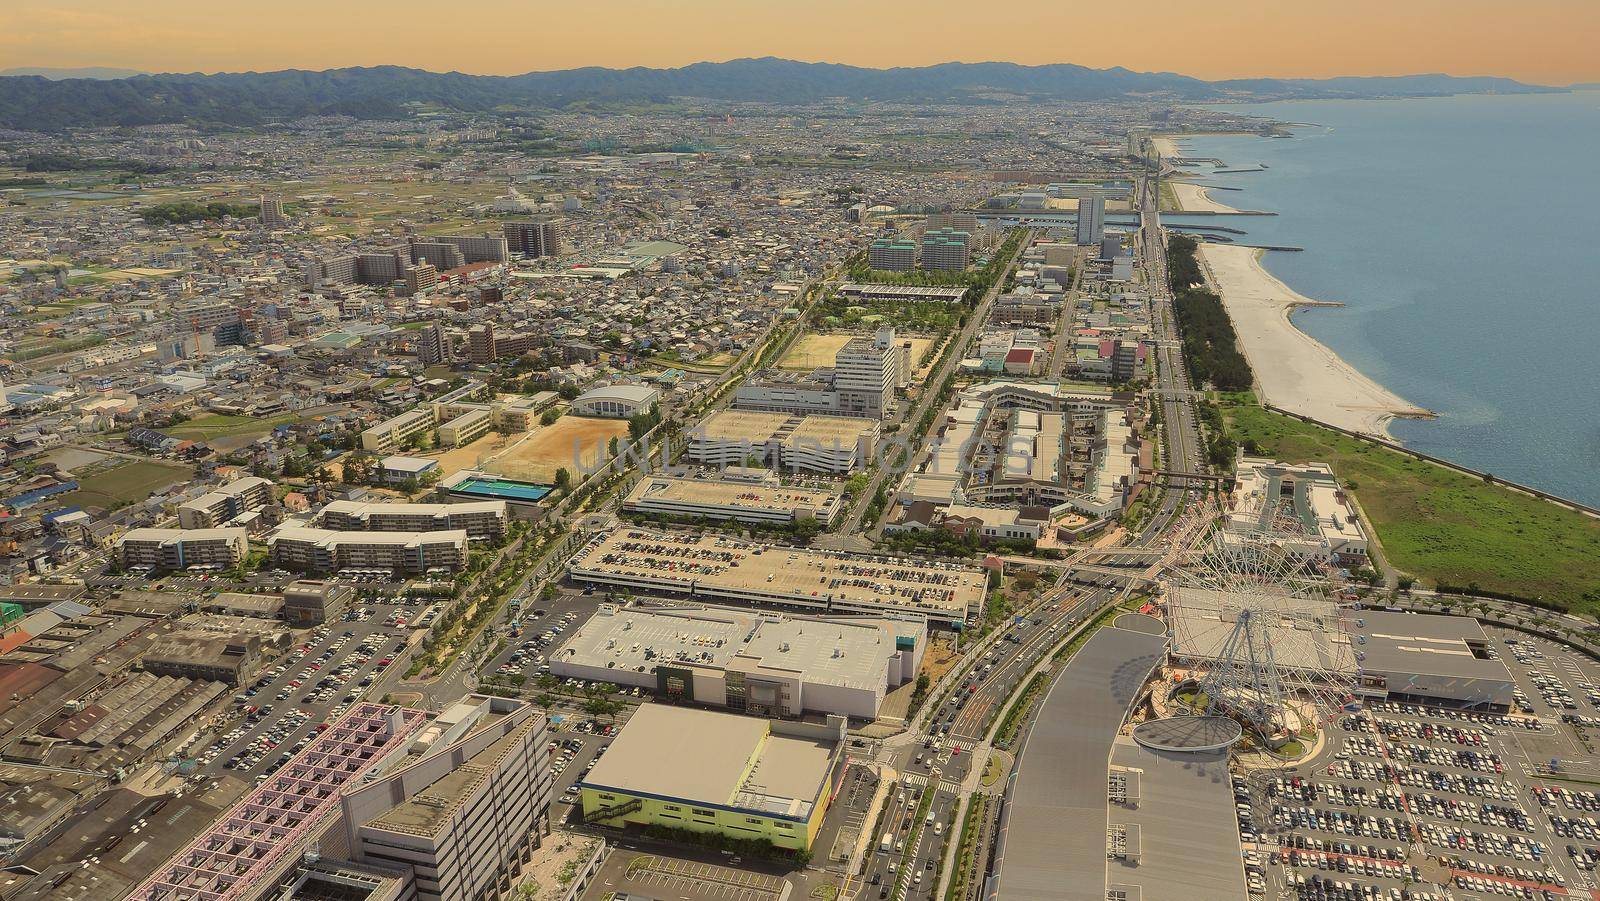 Aerial view or bird eyes view images of Kansai bay area Osaka Japan include big premium outlets located across from Kansai International Airport and it's largest airport in western Osaka bay Kansai Japan. 